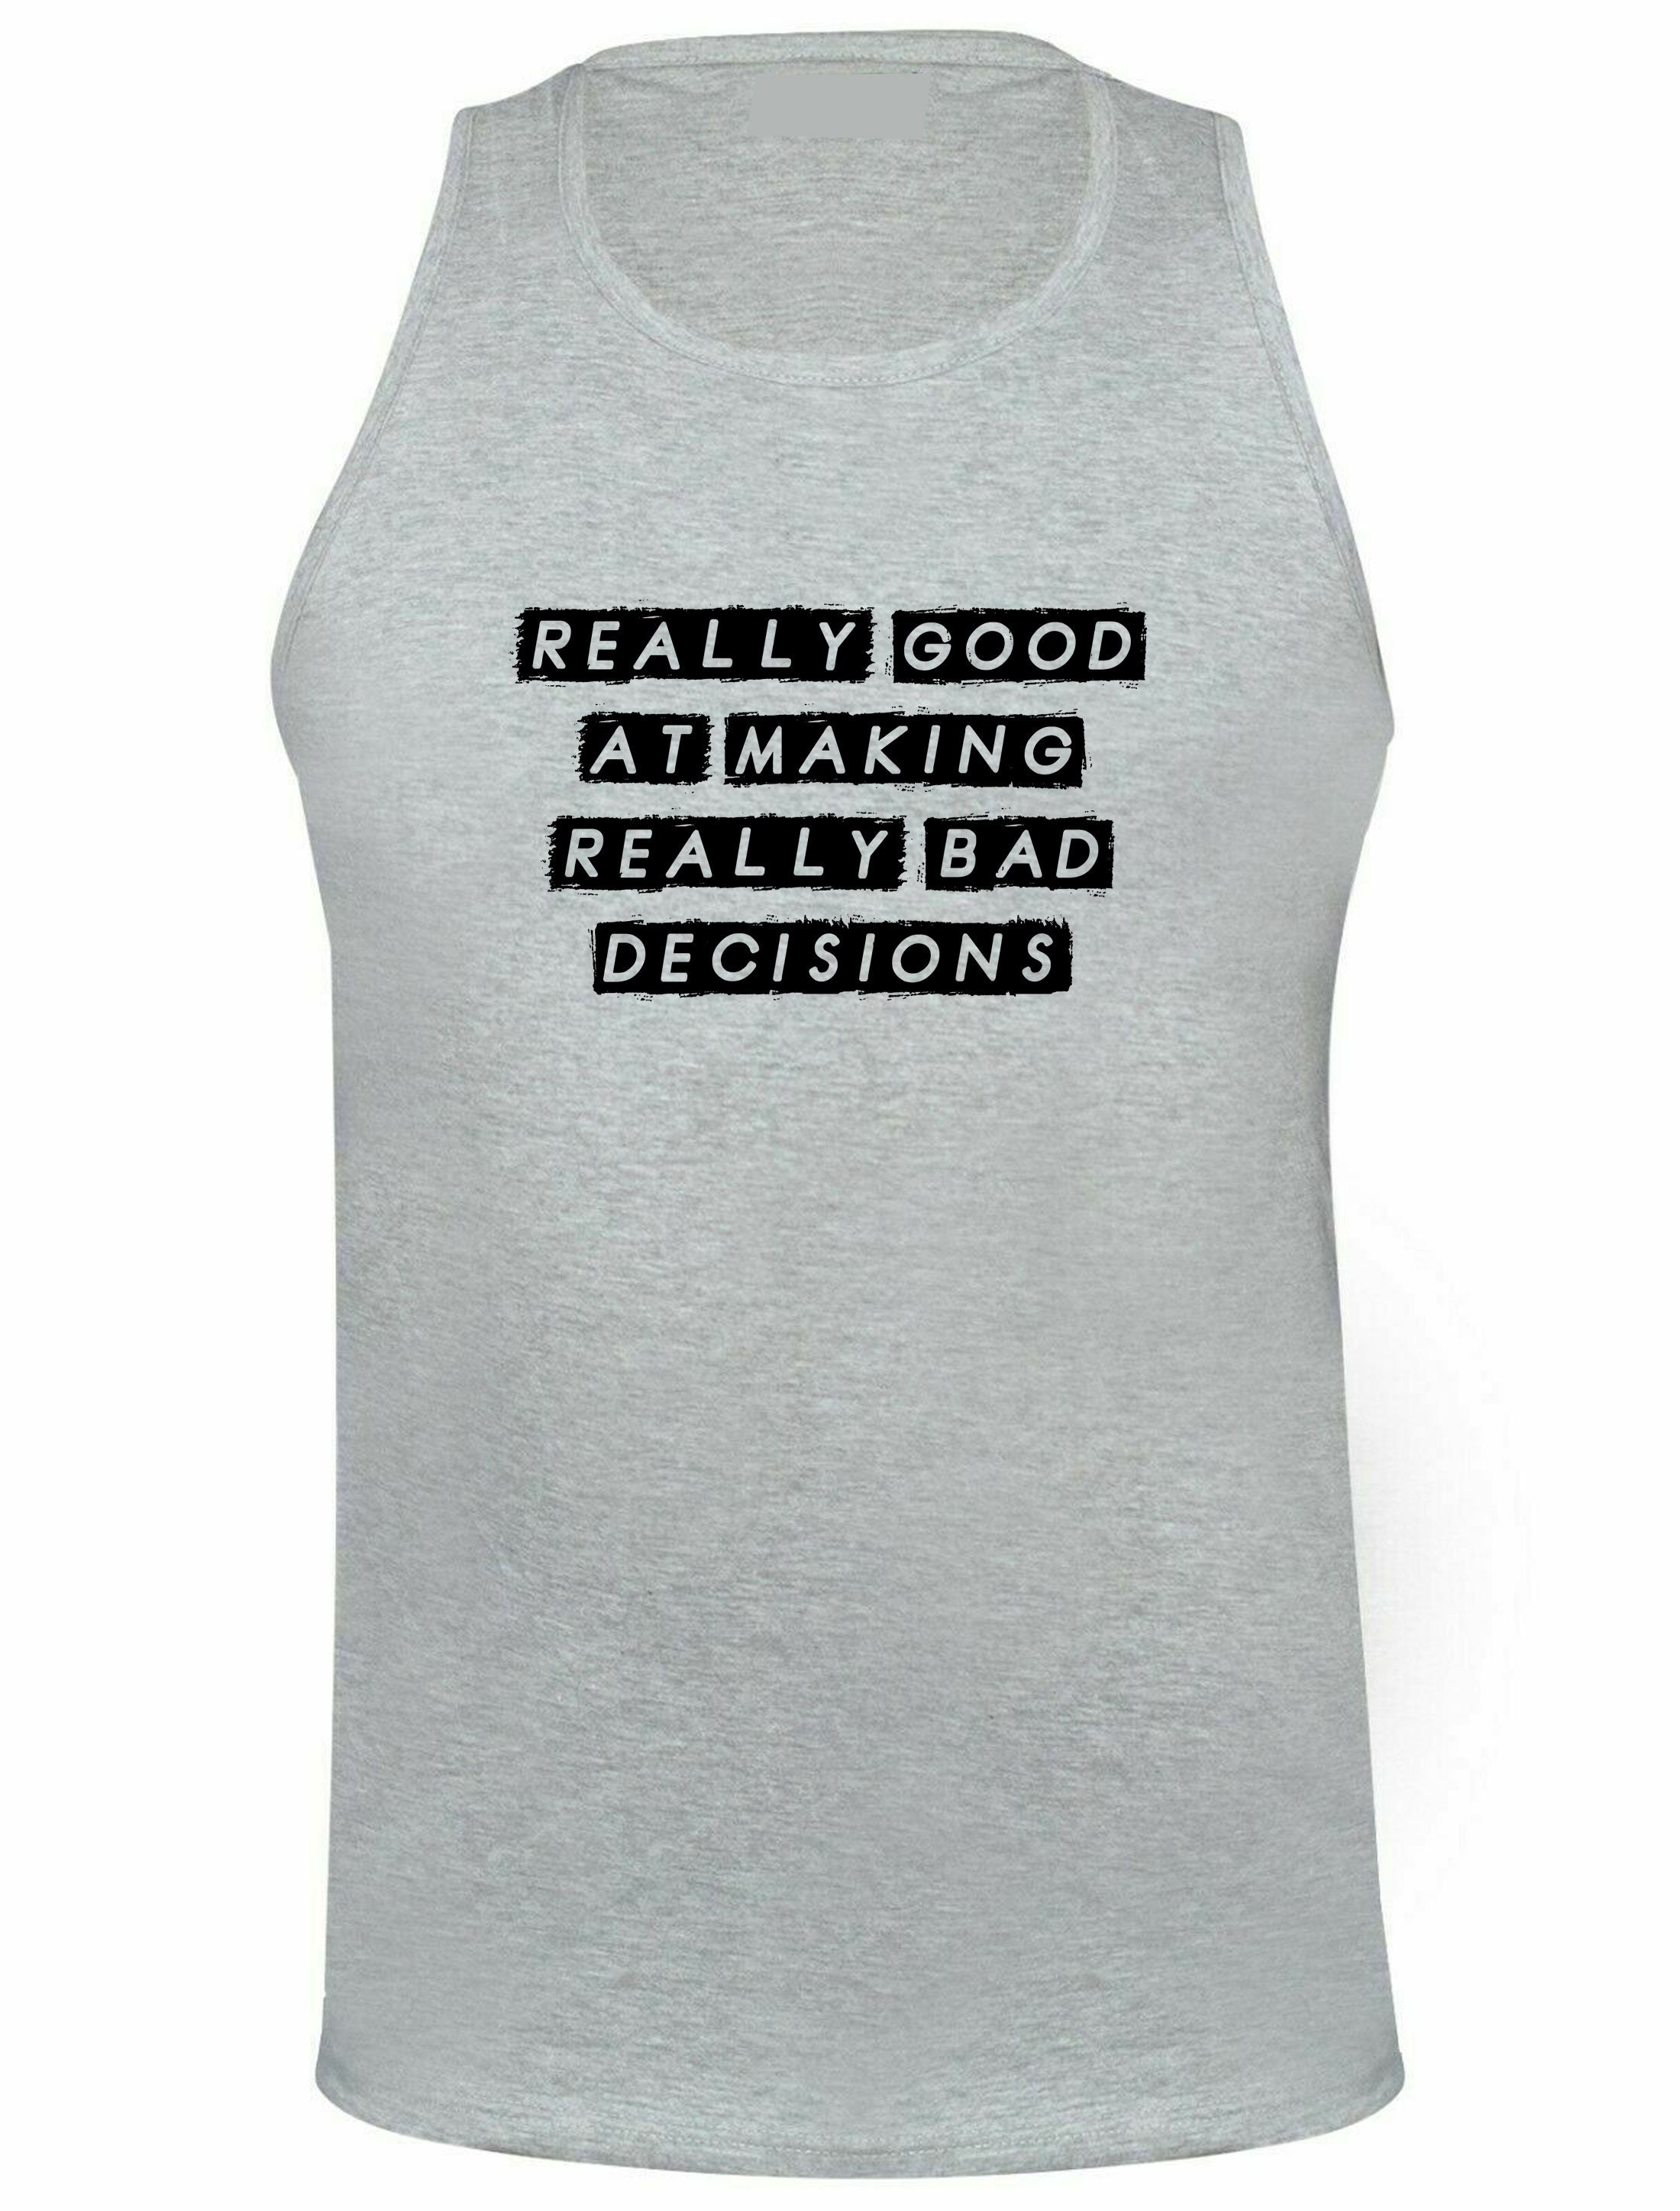 Really Good at Making Really Bad Decisions Funny Vests Vest - Etsy